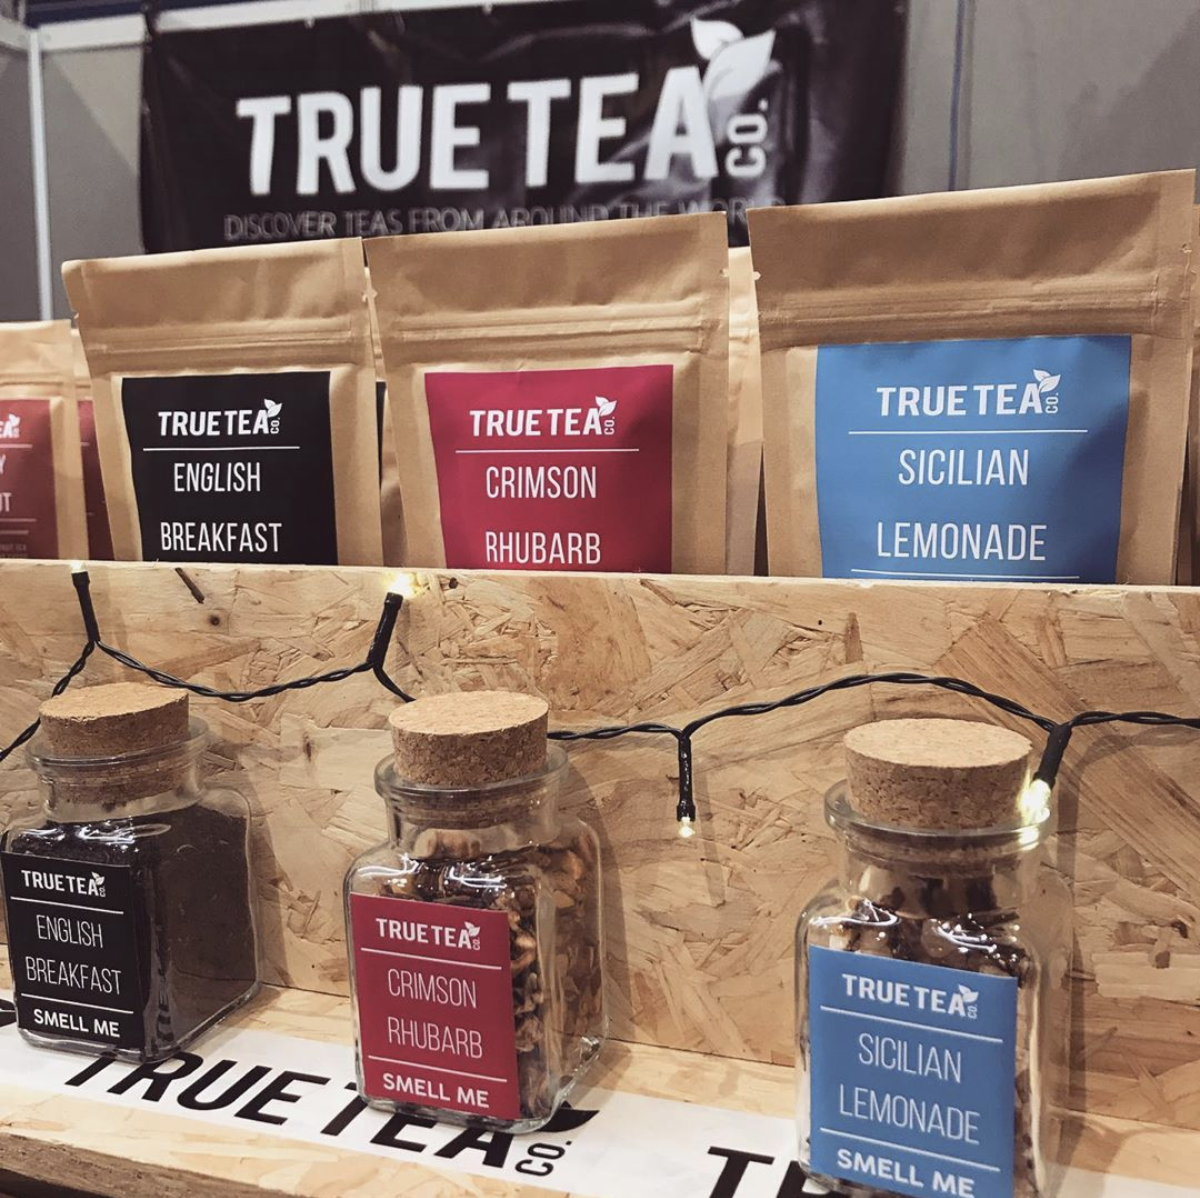 Our teas on display in harrogate, north yorkshire